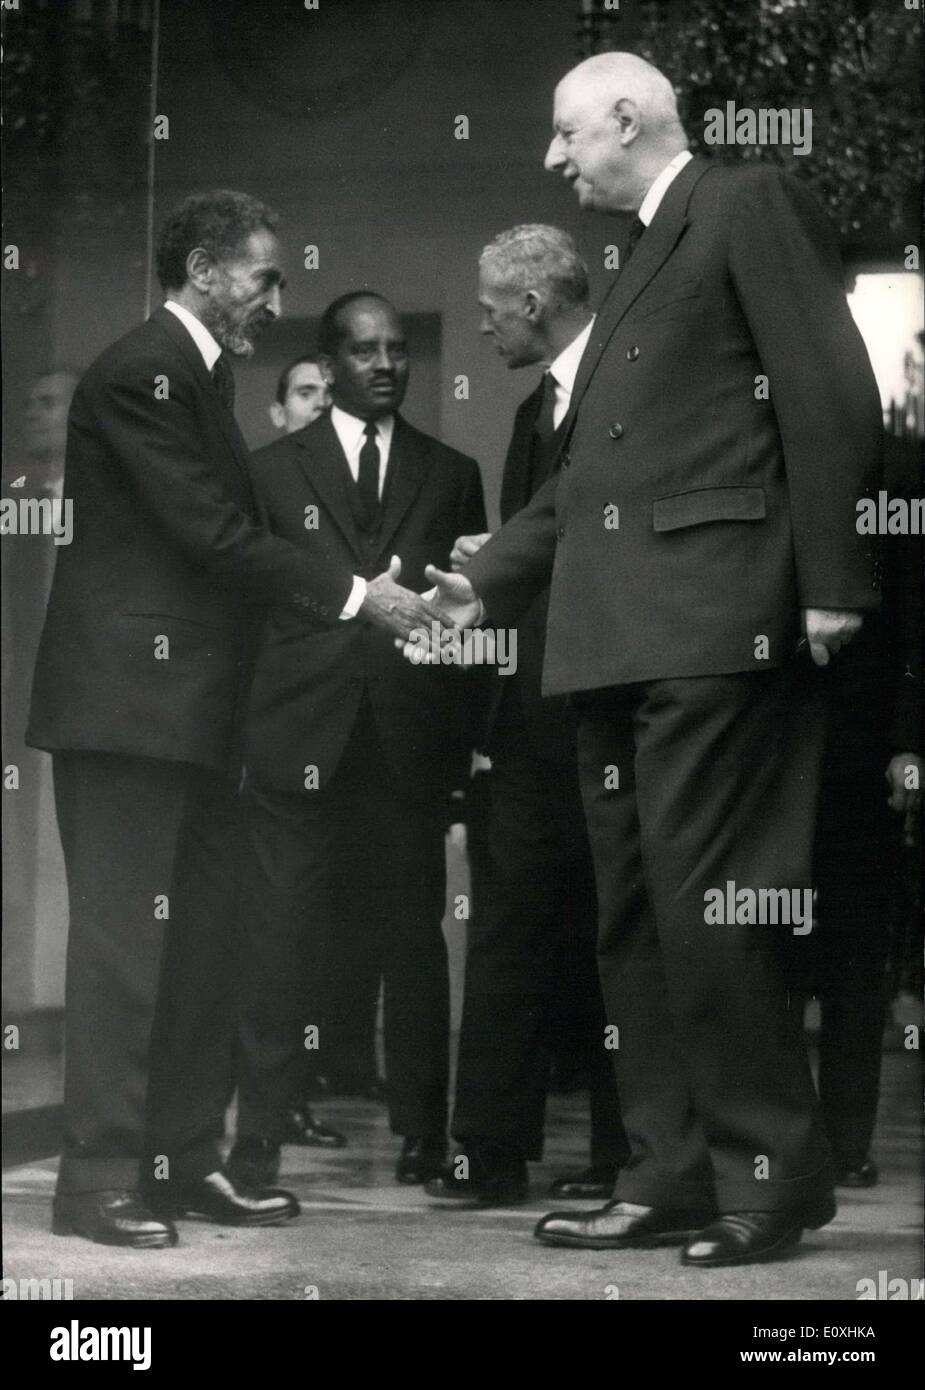 Oct. 20, 1966 - Haile Selassie On Flying Visit To Paris: Haile Selassie, Emperor Of Ethiopia, Who Is Now Staying In Geneva For A Cure Paid A One-Day Visit To Paris. Photo shows General De Gaulle Receives Haile Selassie At The Elysee Palace This Morning. Stock Photo